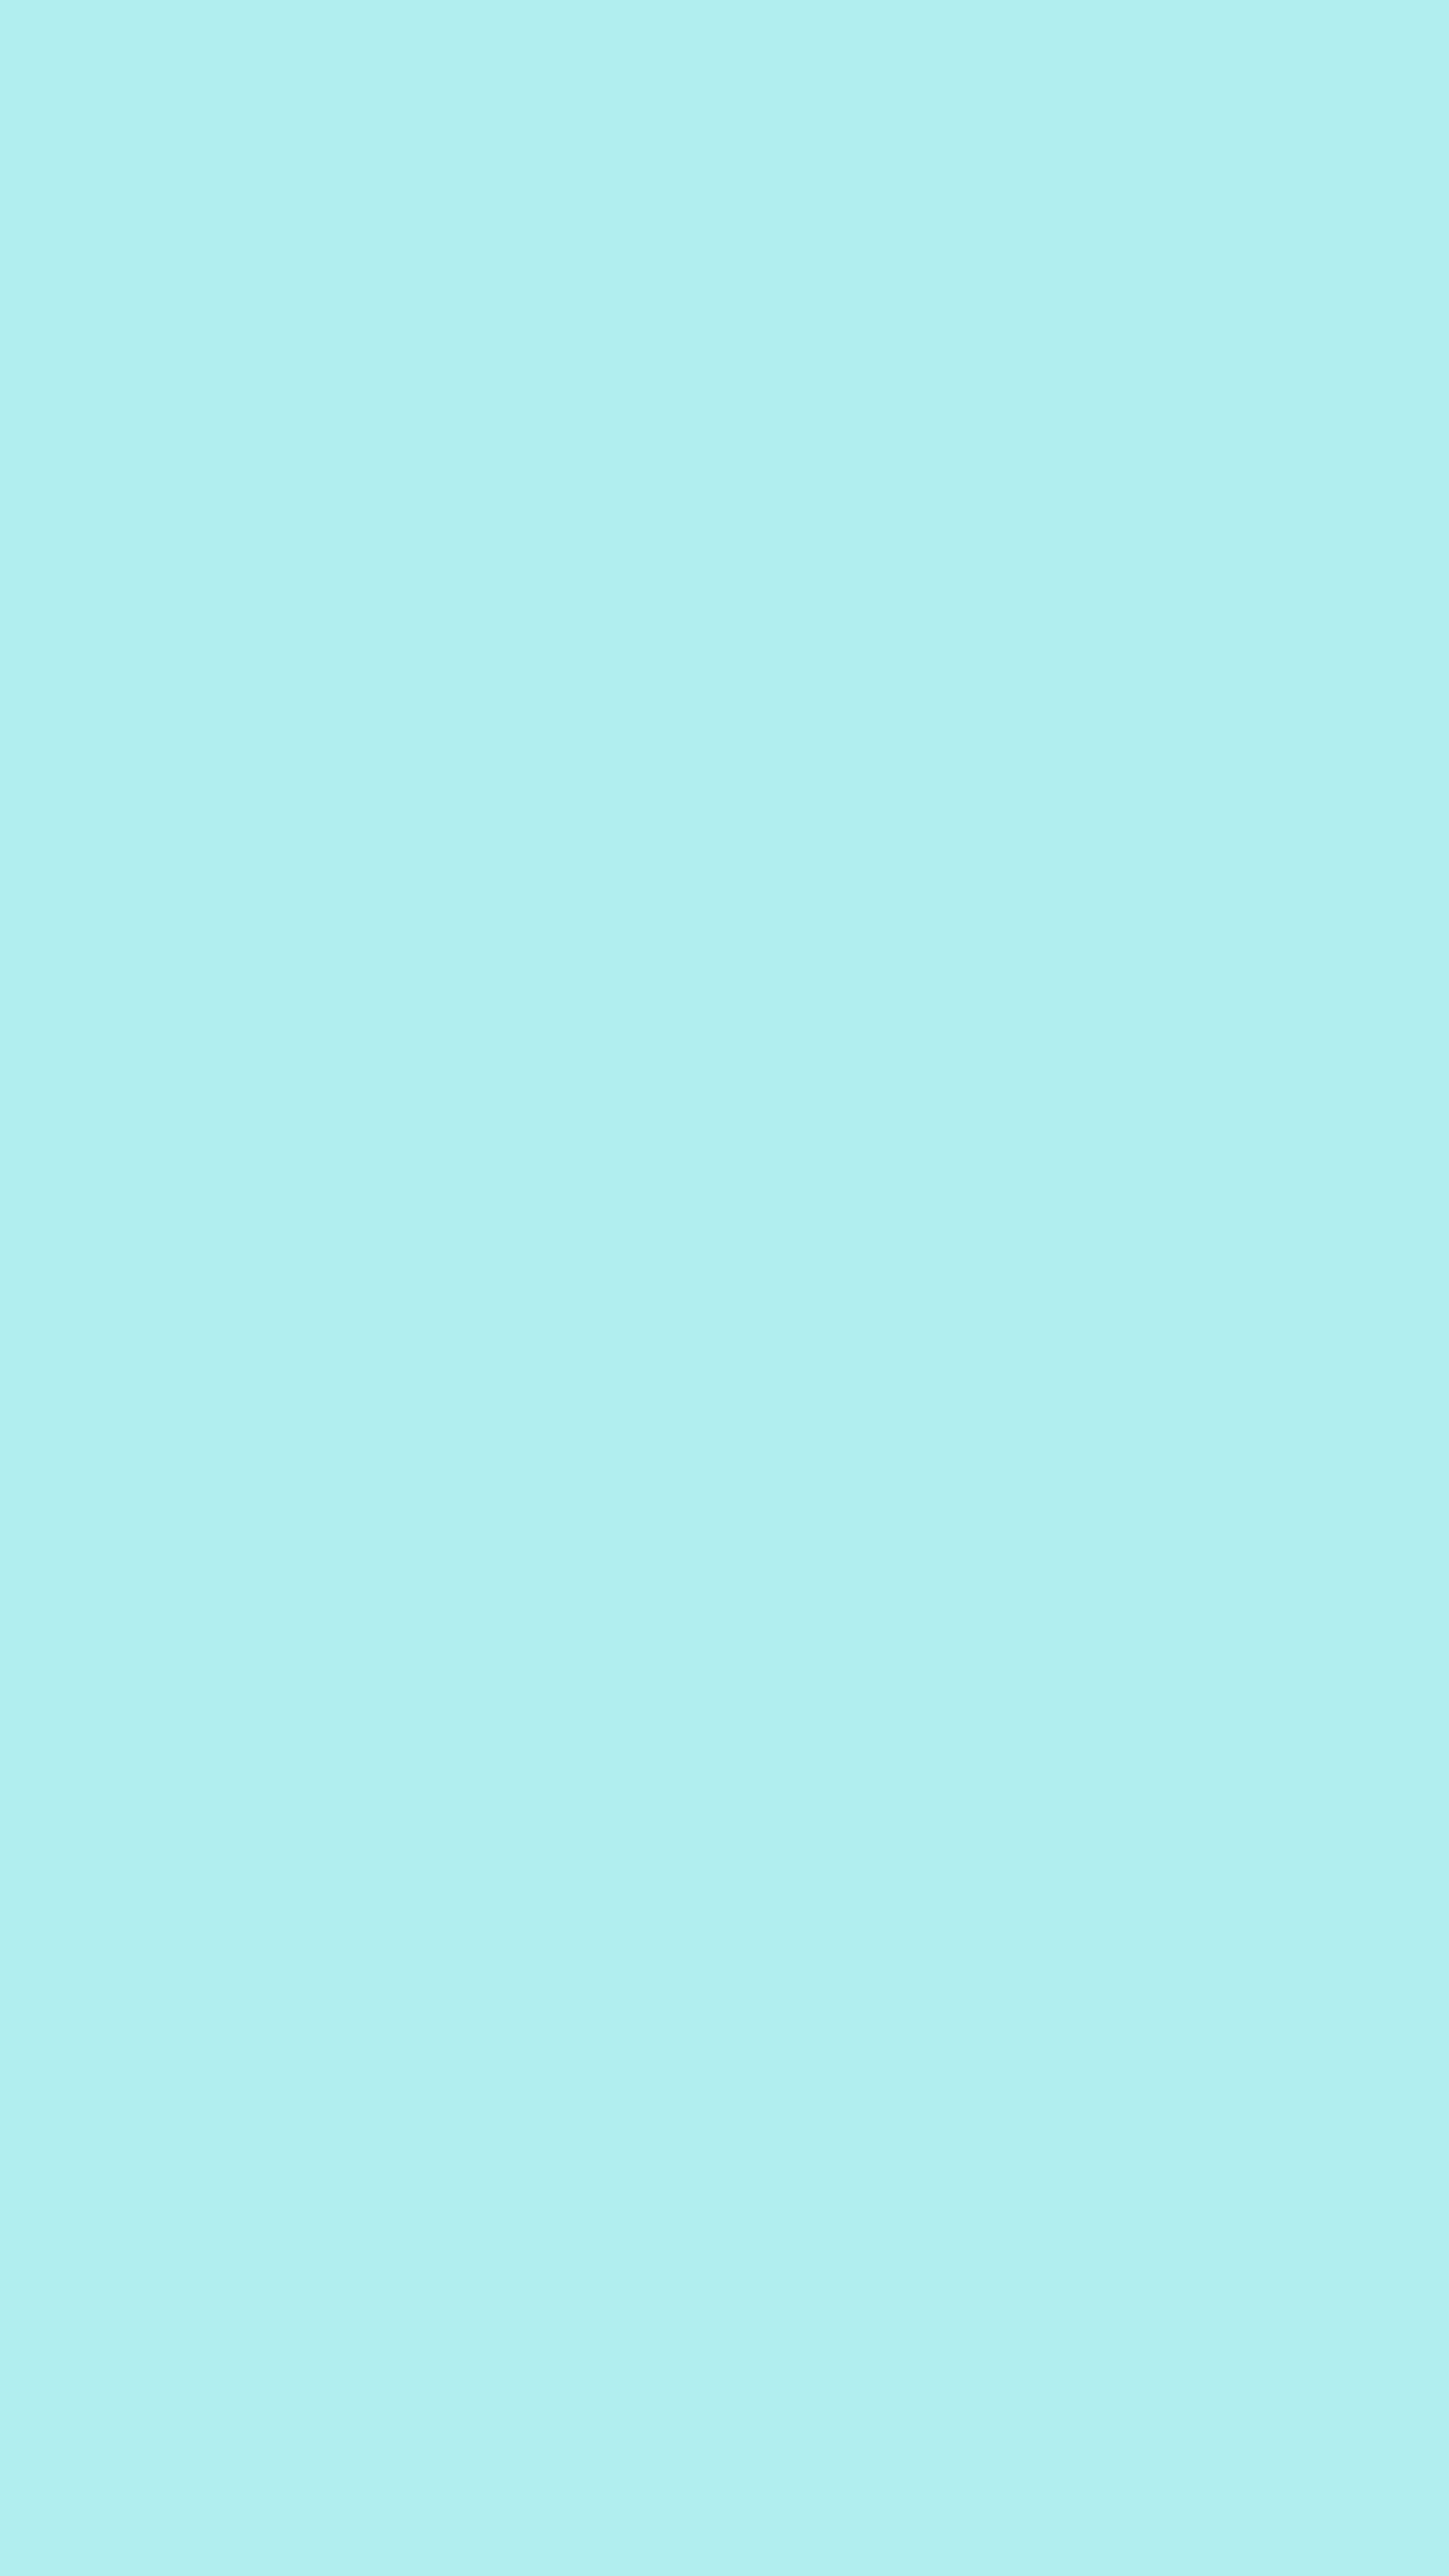 Pale Turquoise Solid Color Background Wallpaper For Mobile – Phone -  Chill-out Wallpapers